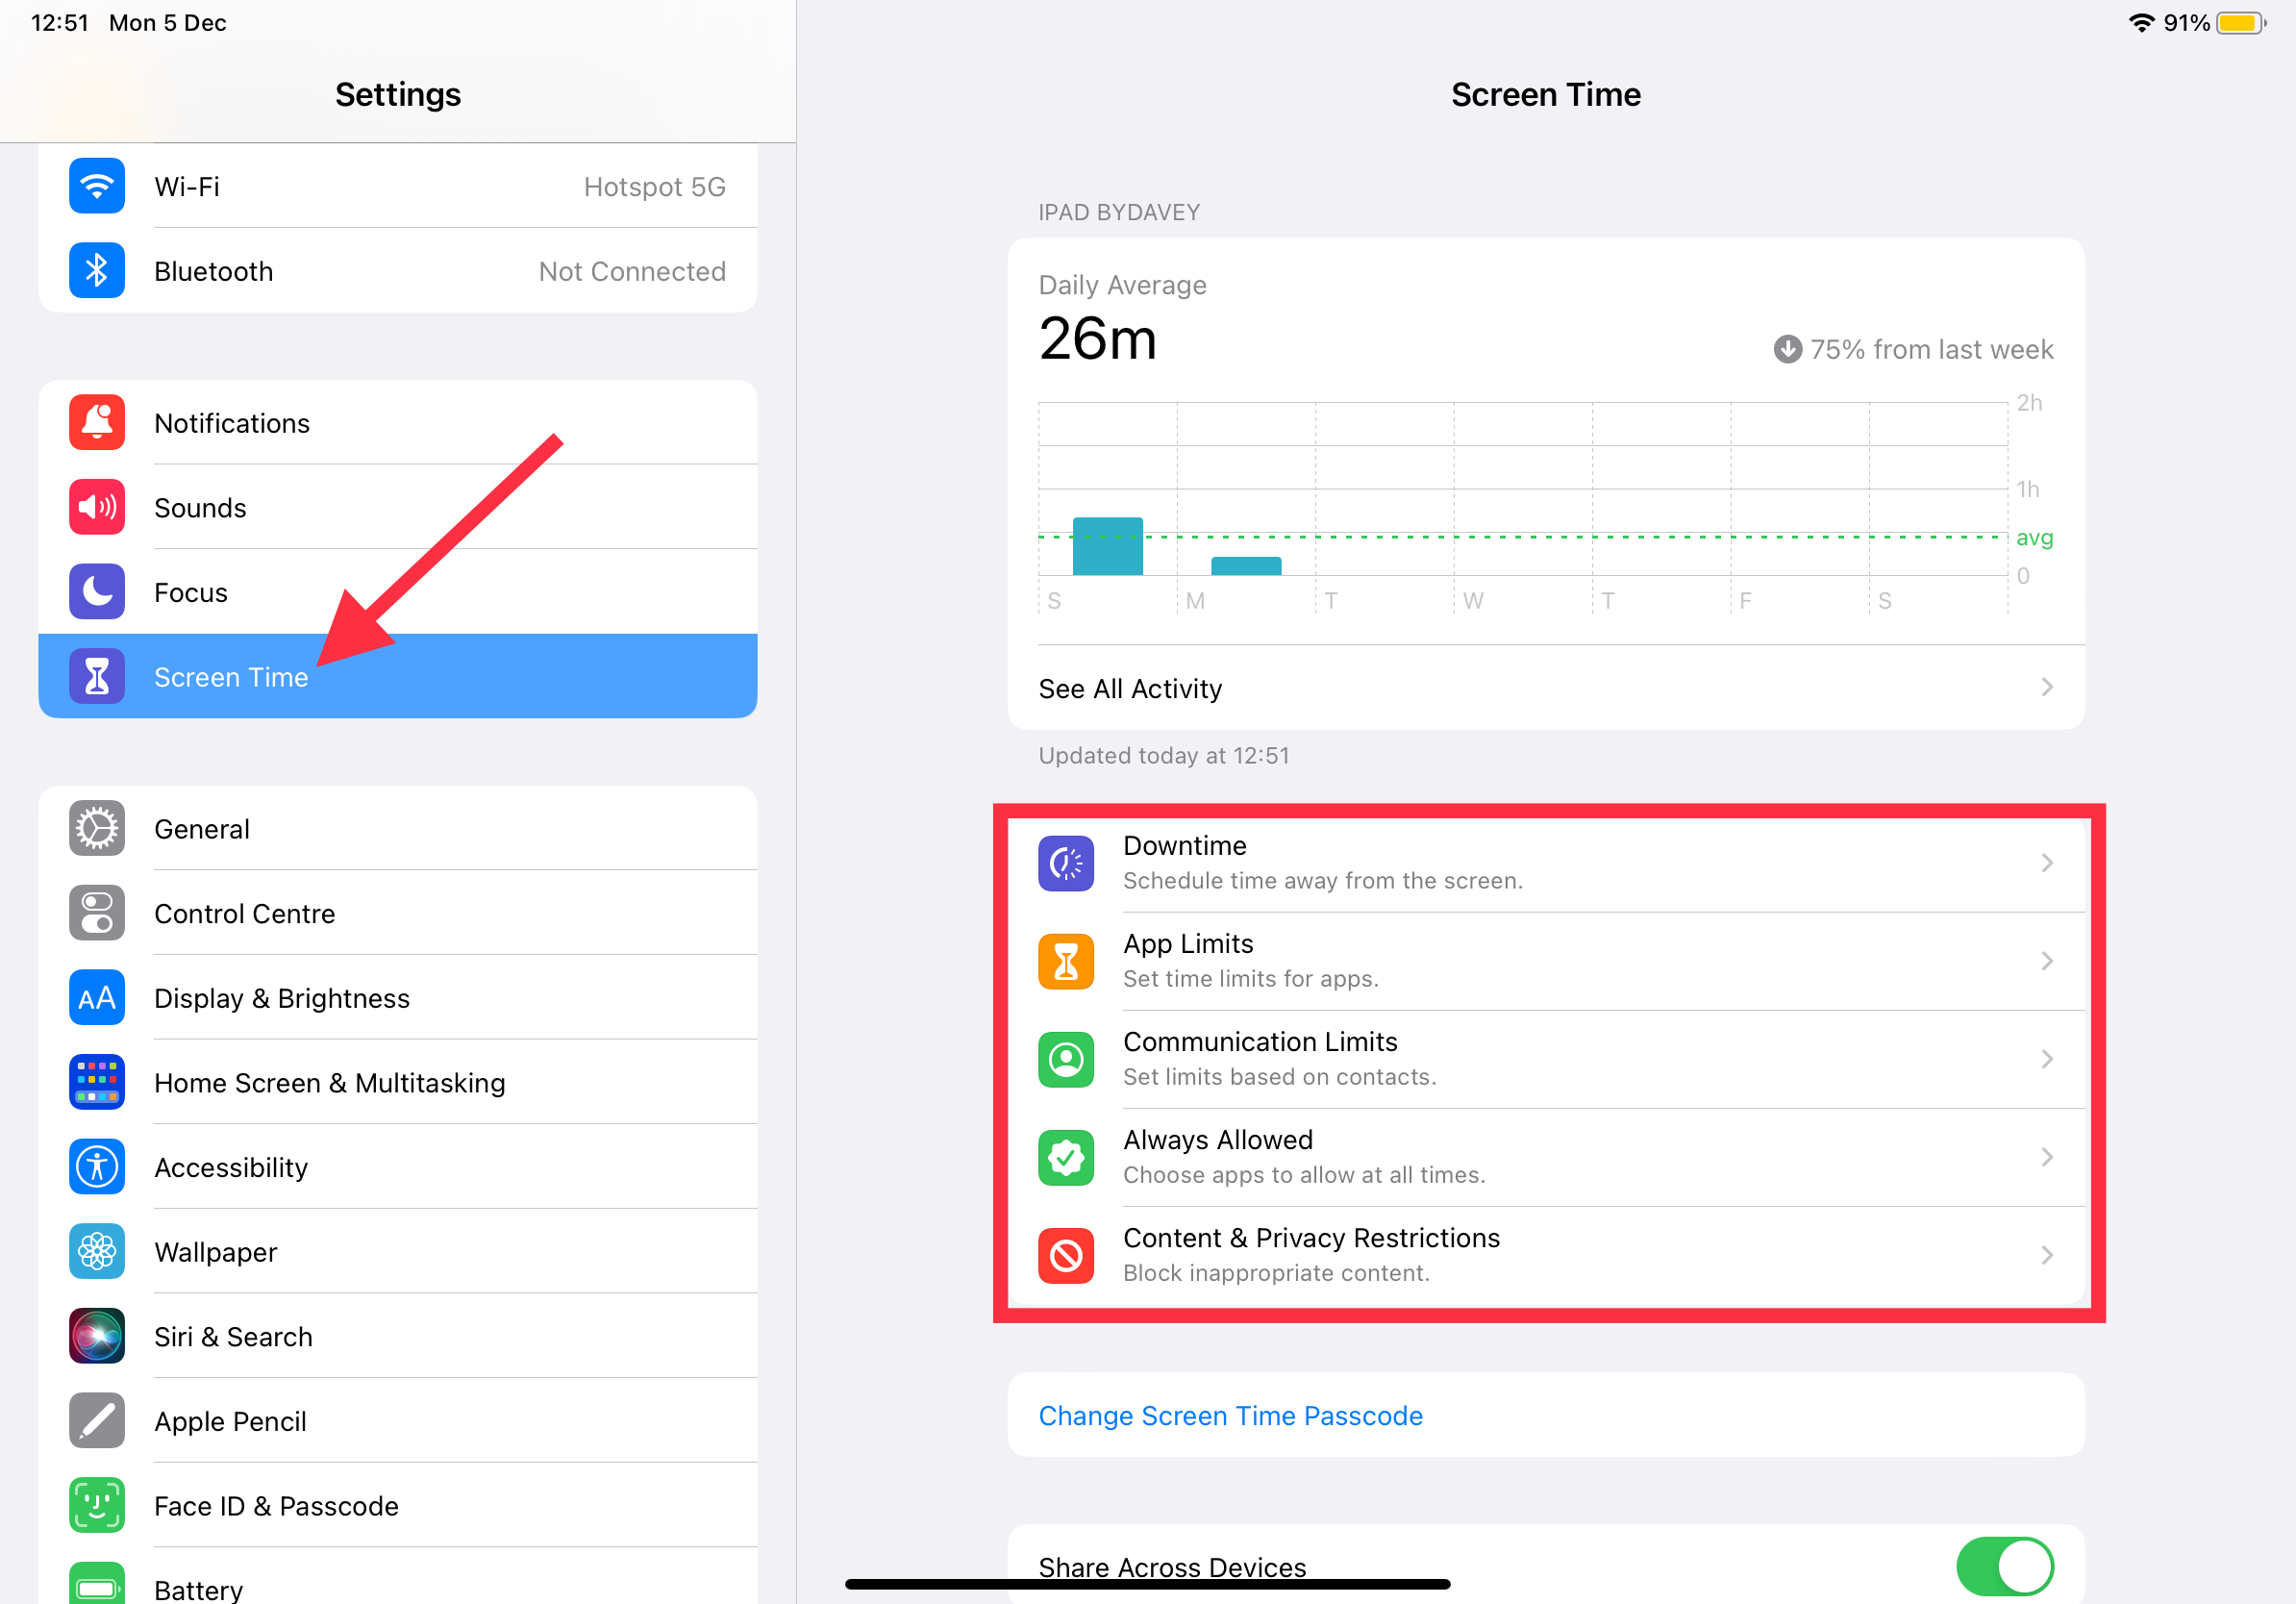 Remote.tools show how to configure screen time on iPad